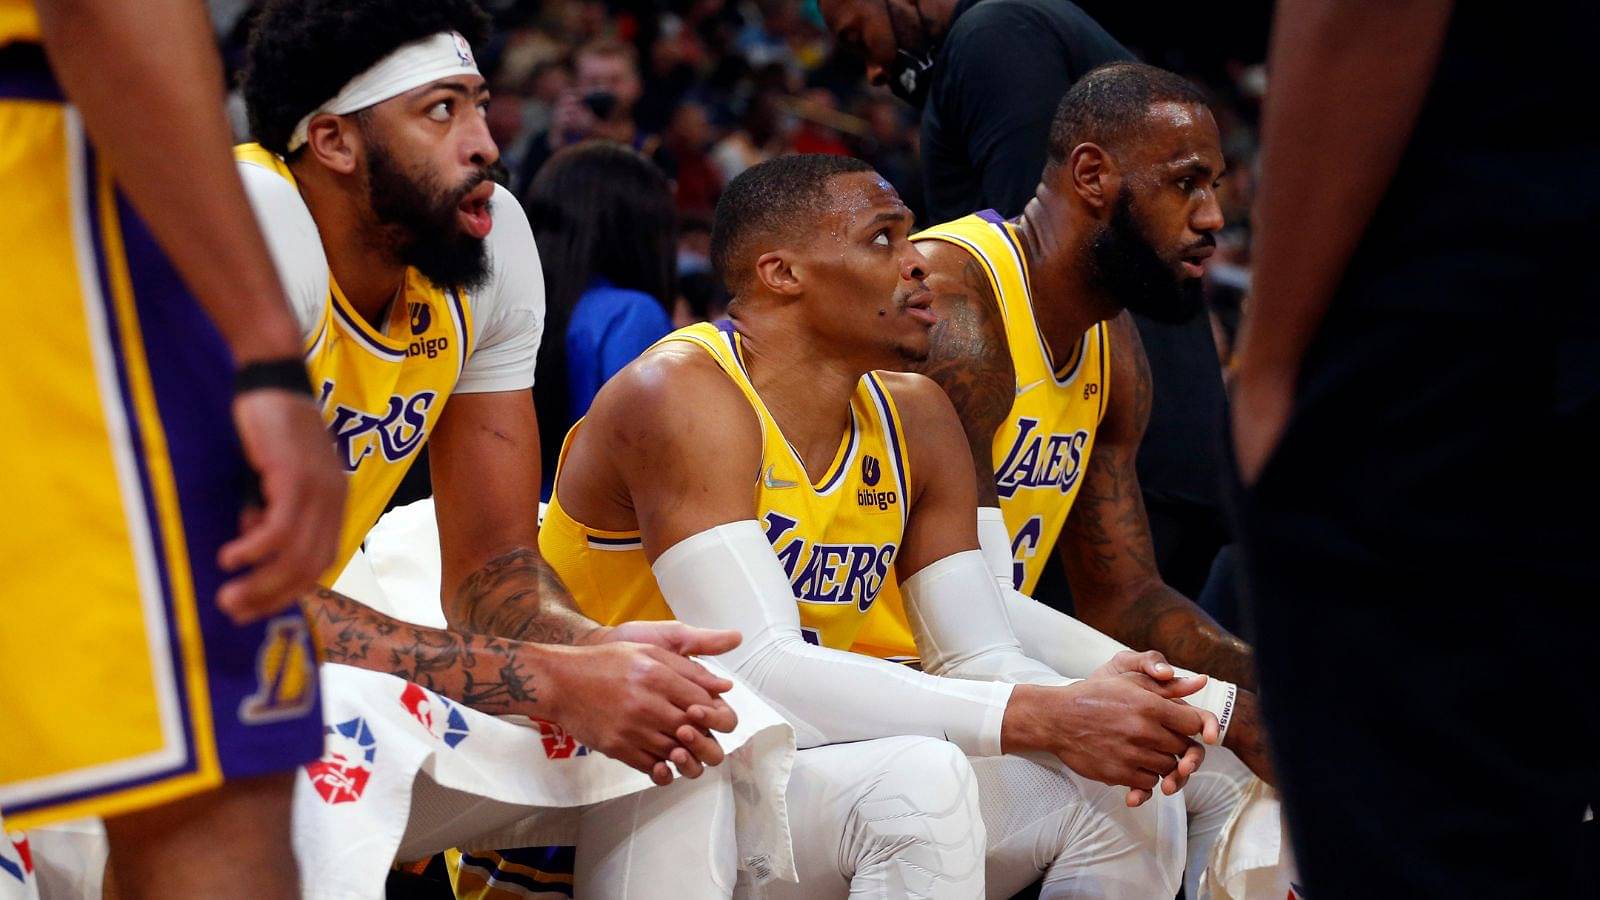 “If Russell Westbrook made half the layups he missed, Lakers would've been 2nd seed”: NBA Twitter’s work shows Brodie’s impact who is due $47million for upcoming season